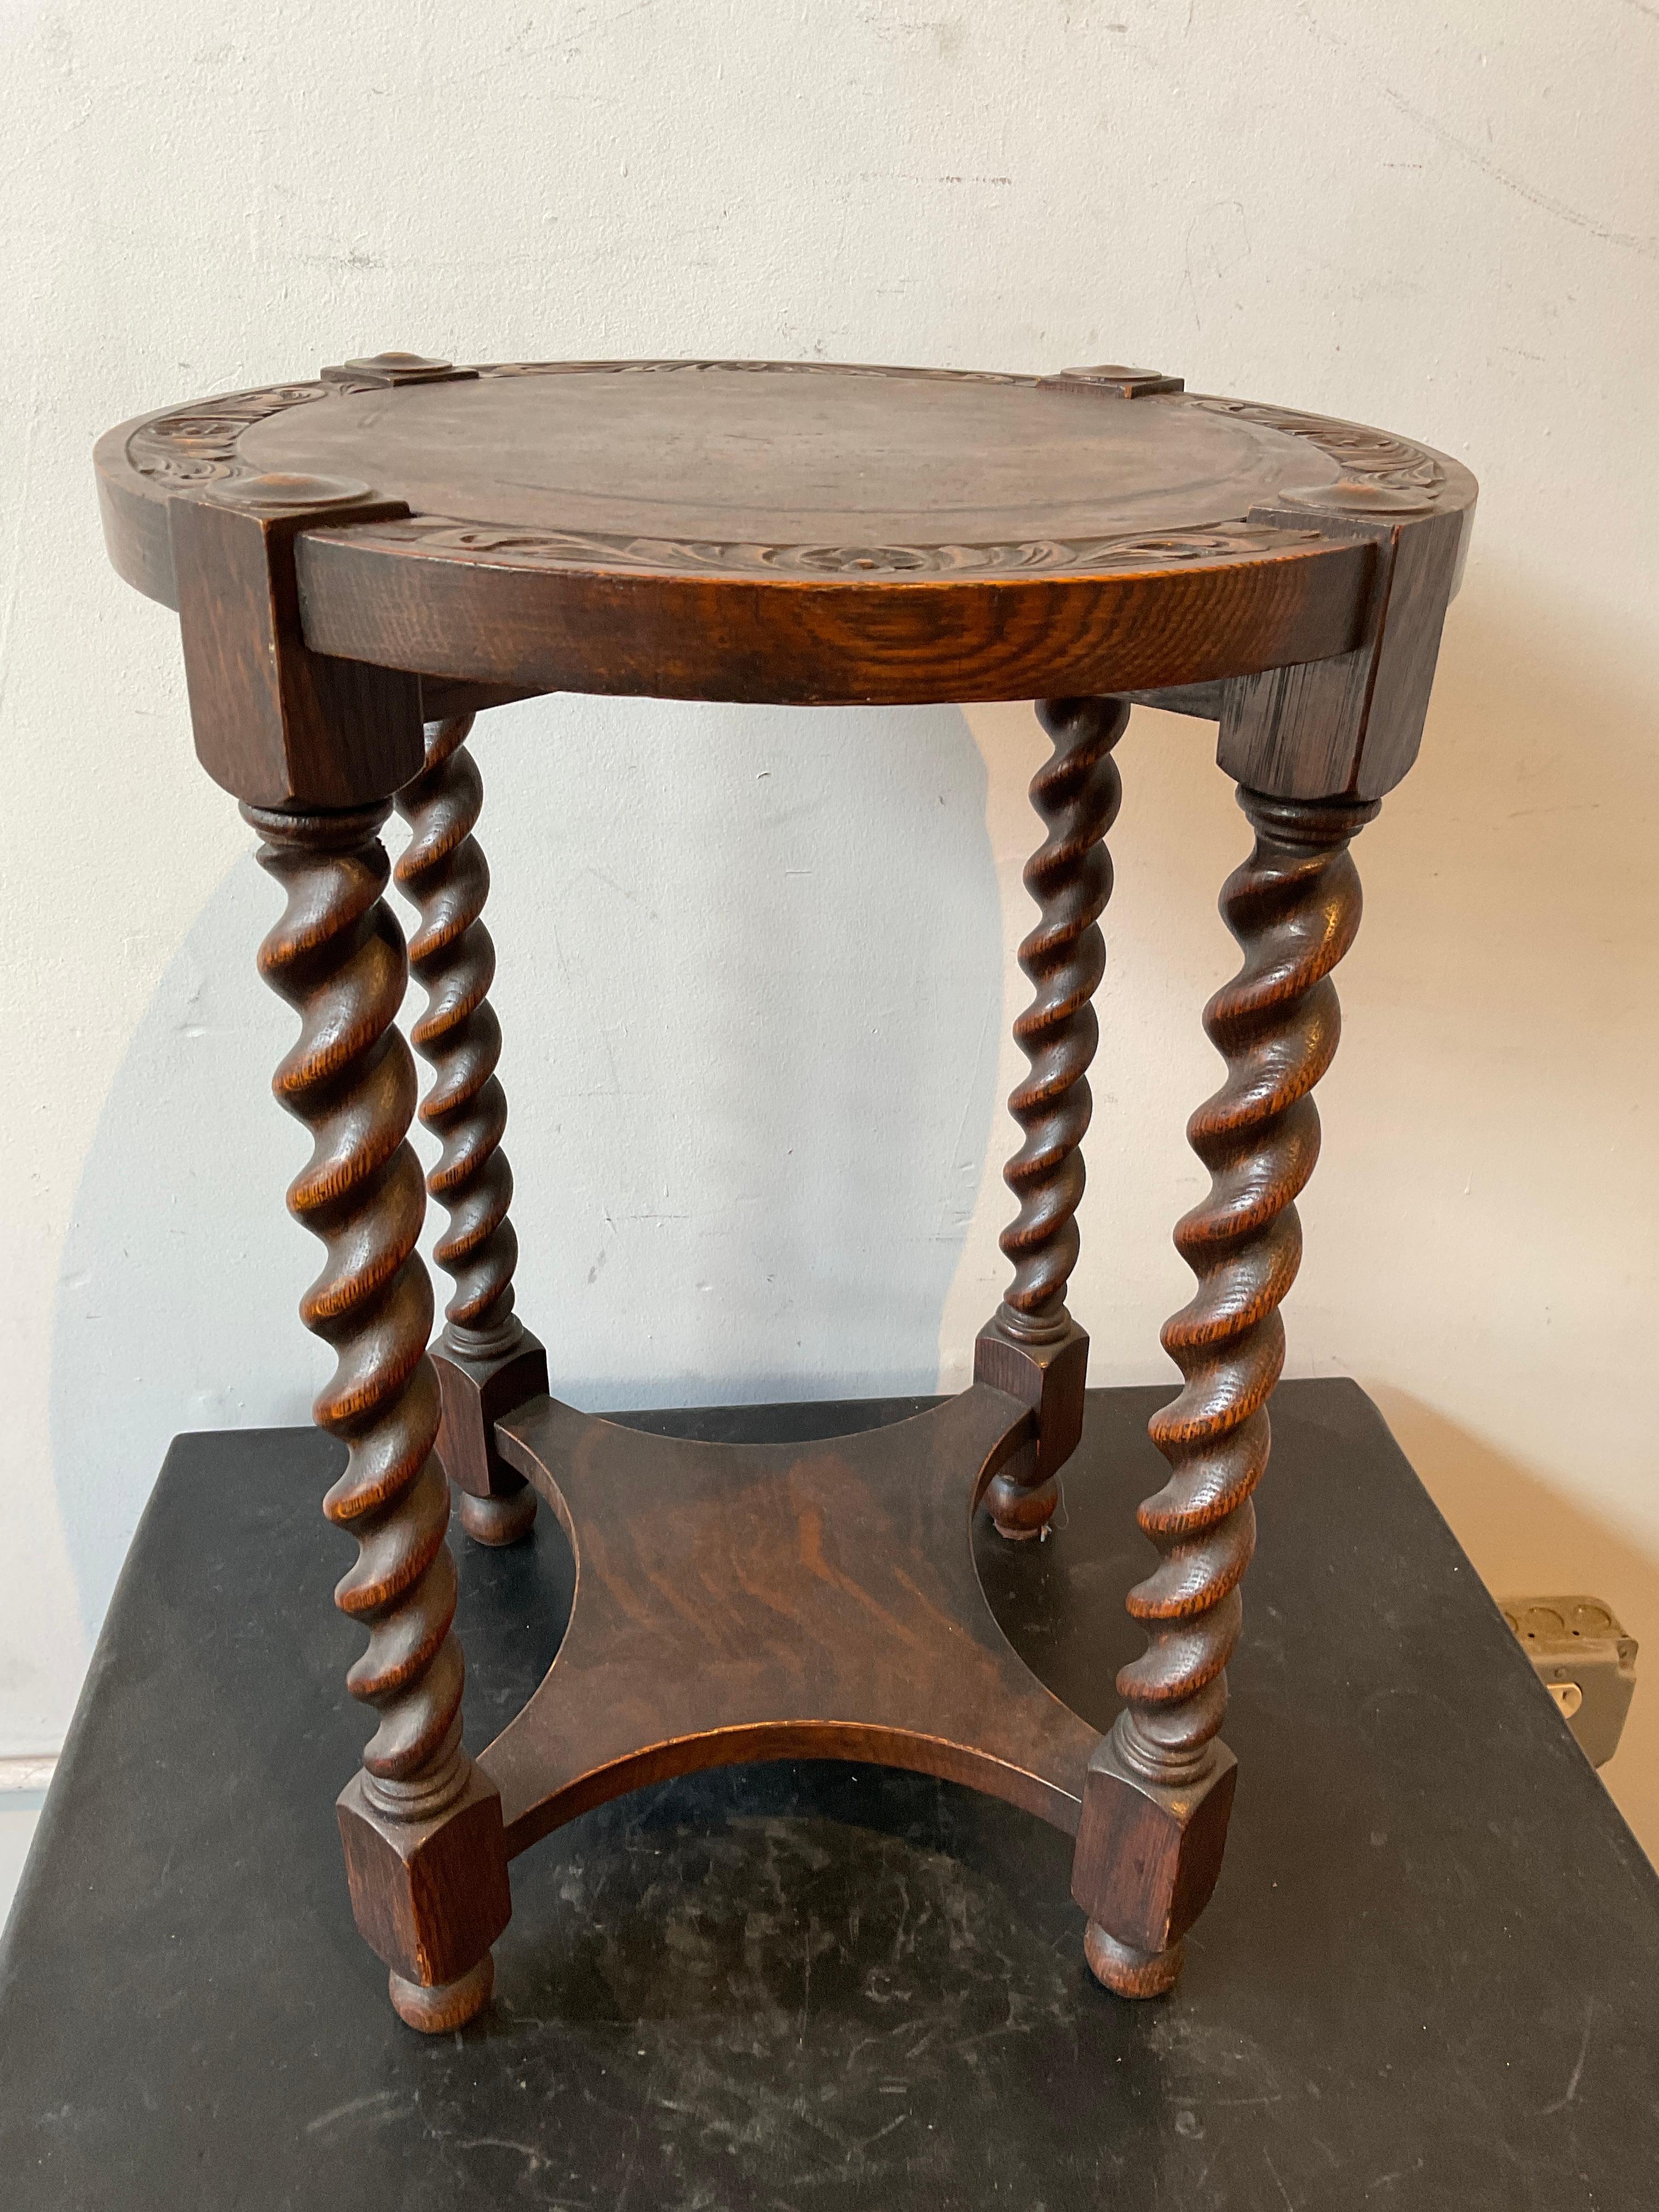 Circa 1900 English Barley Twist Drink Table In Good Condition For Sale In Tarrytown, NY